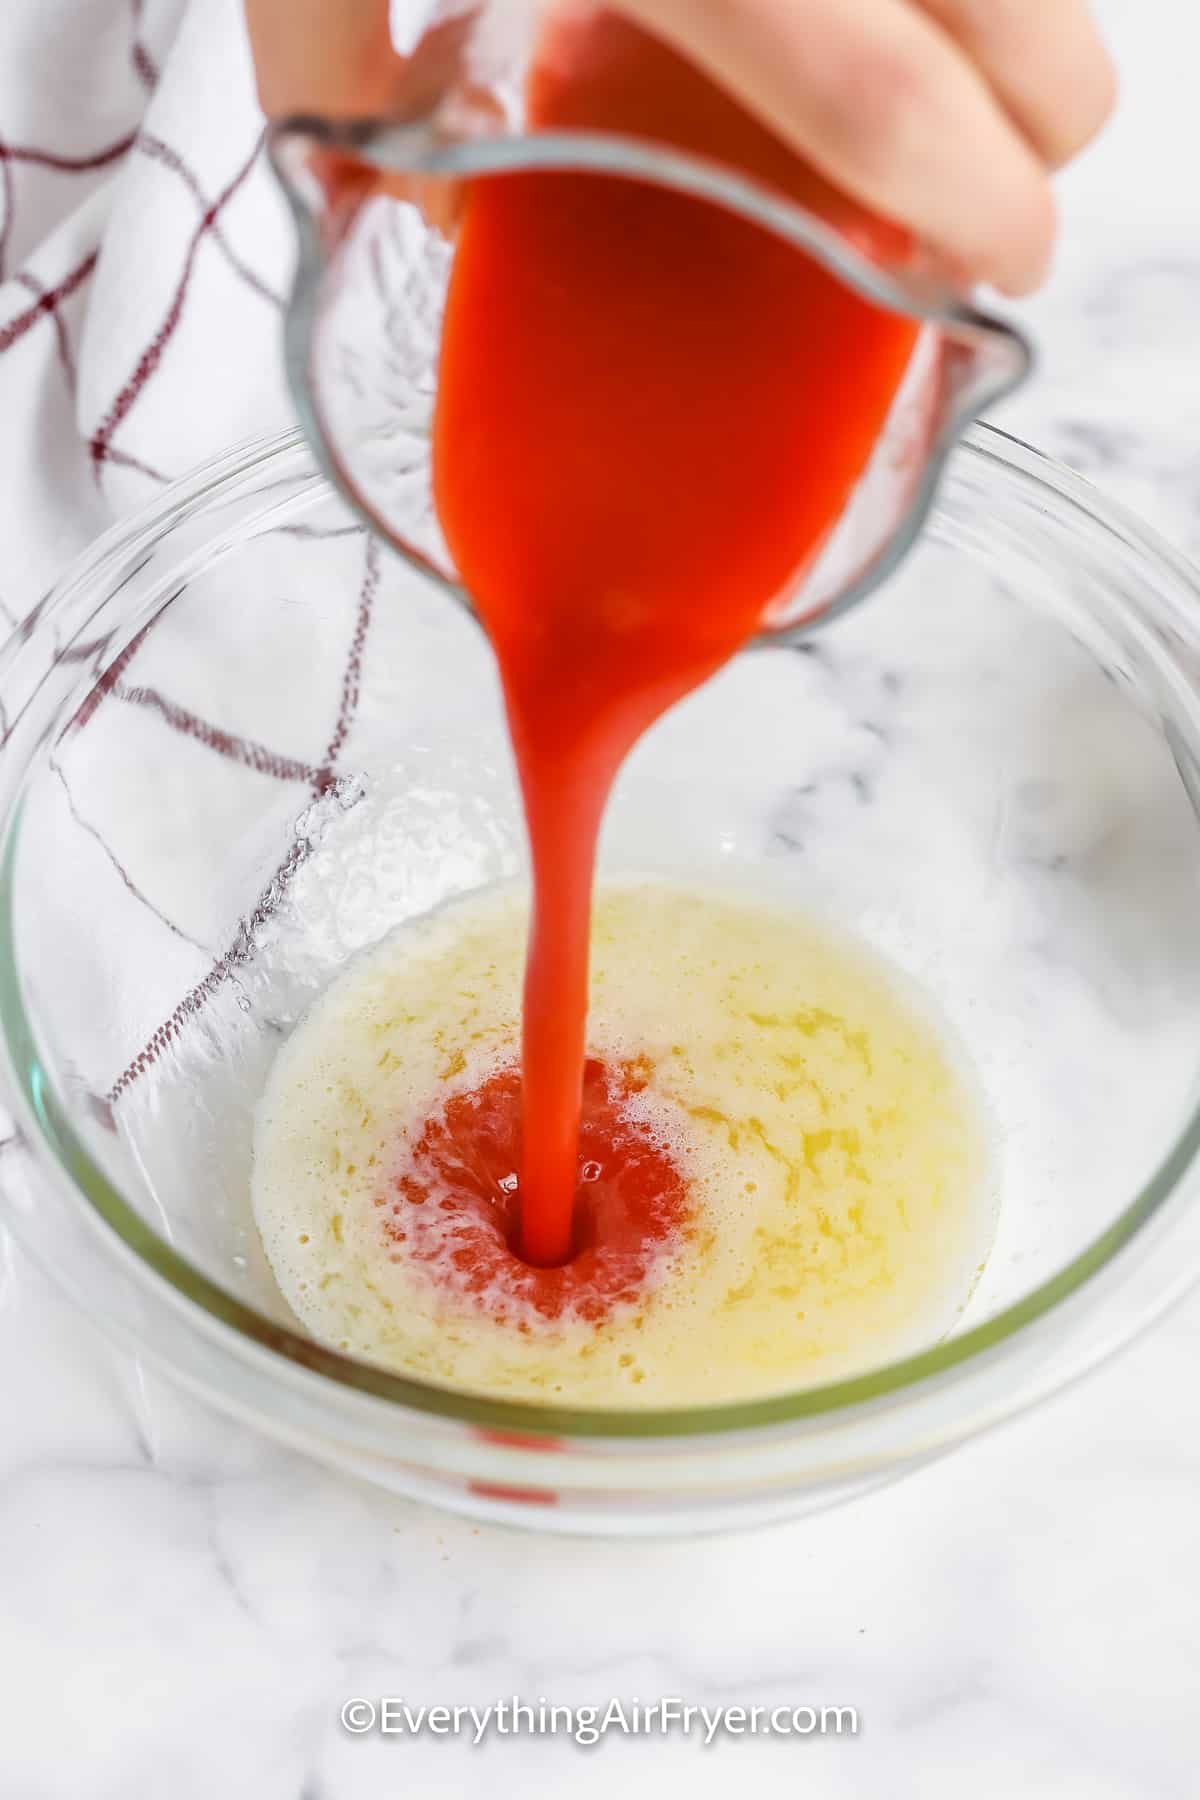 Hot sauce being poured into melted butter